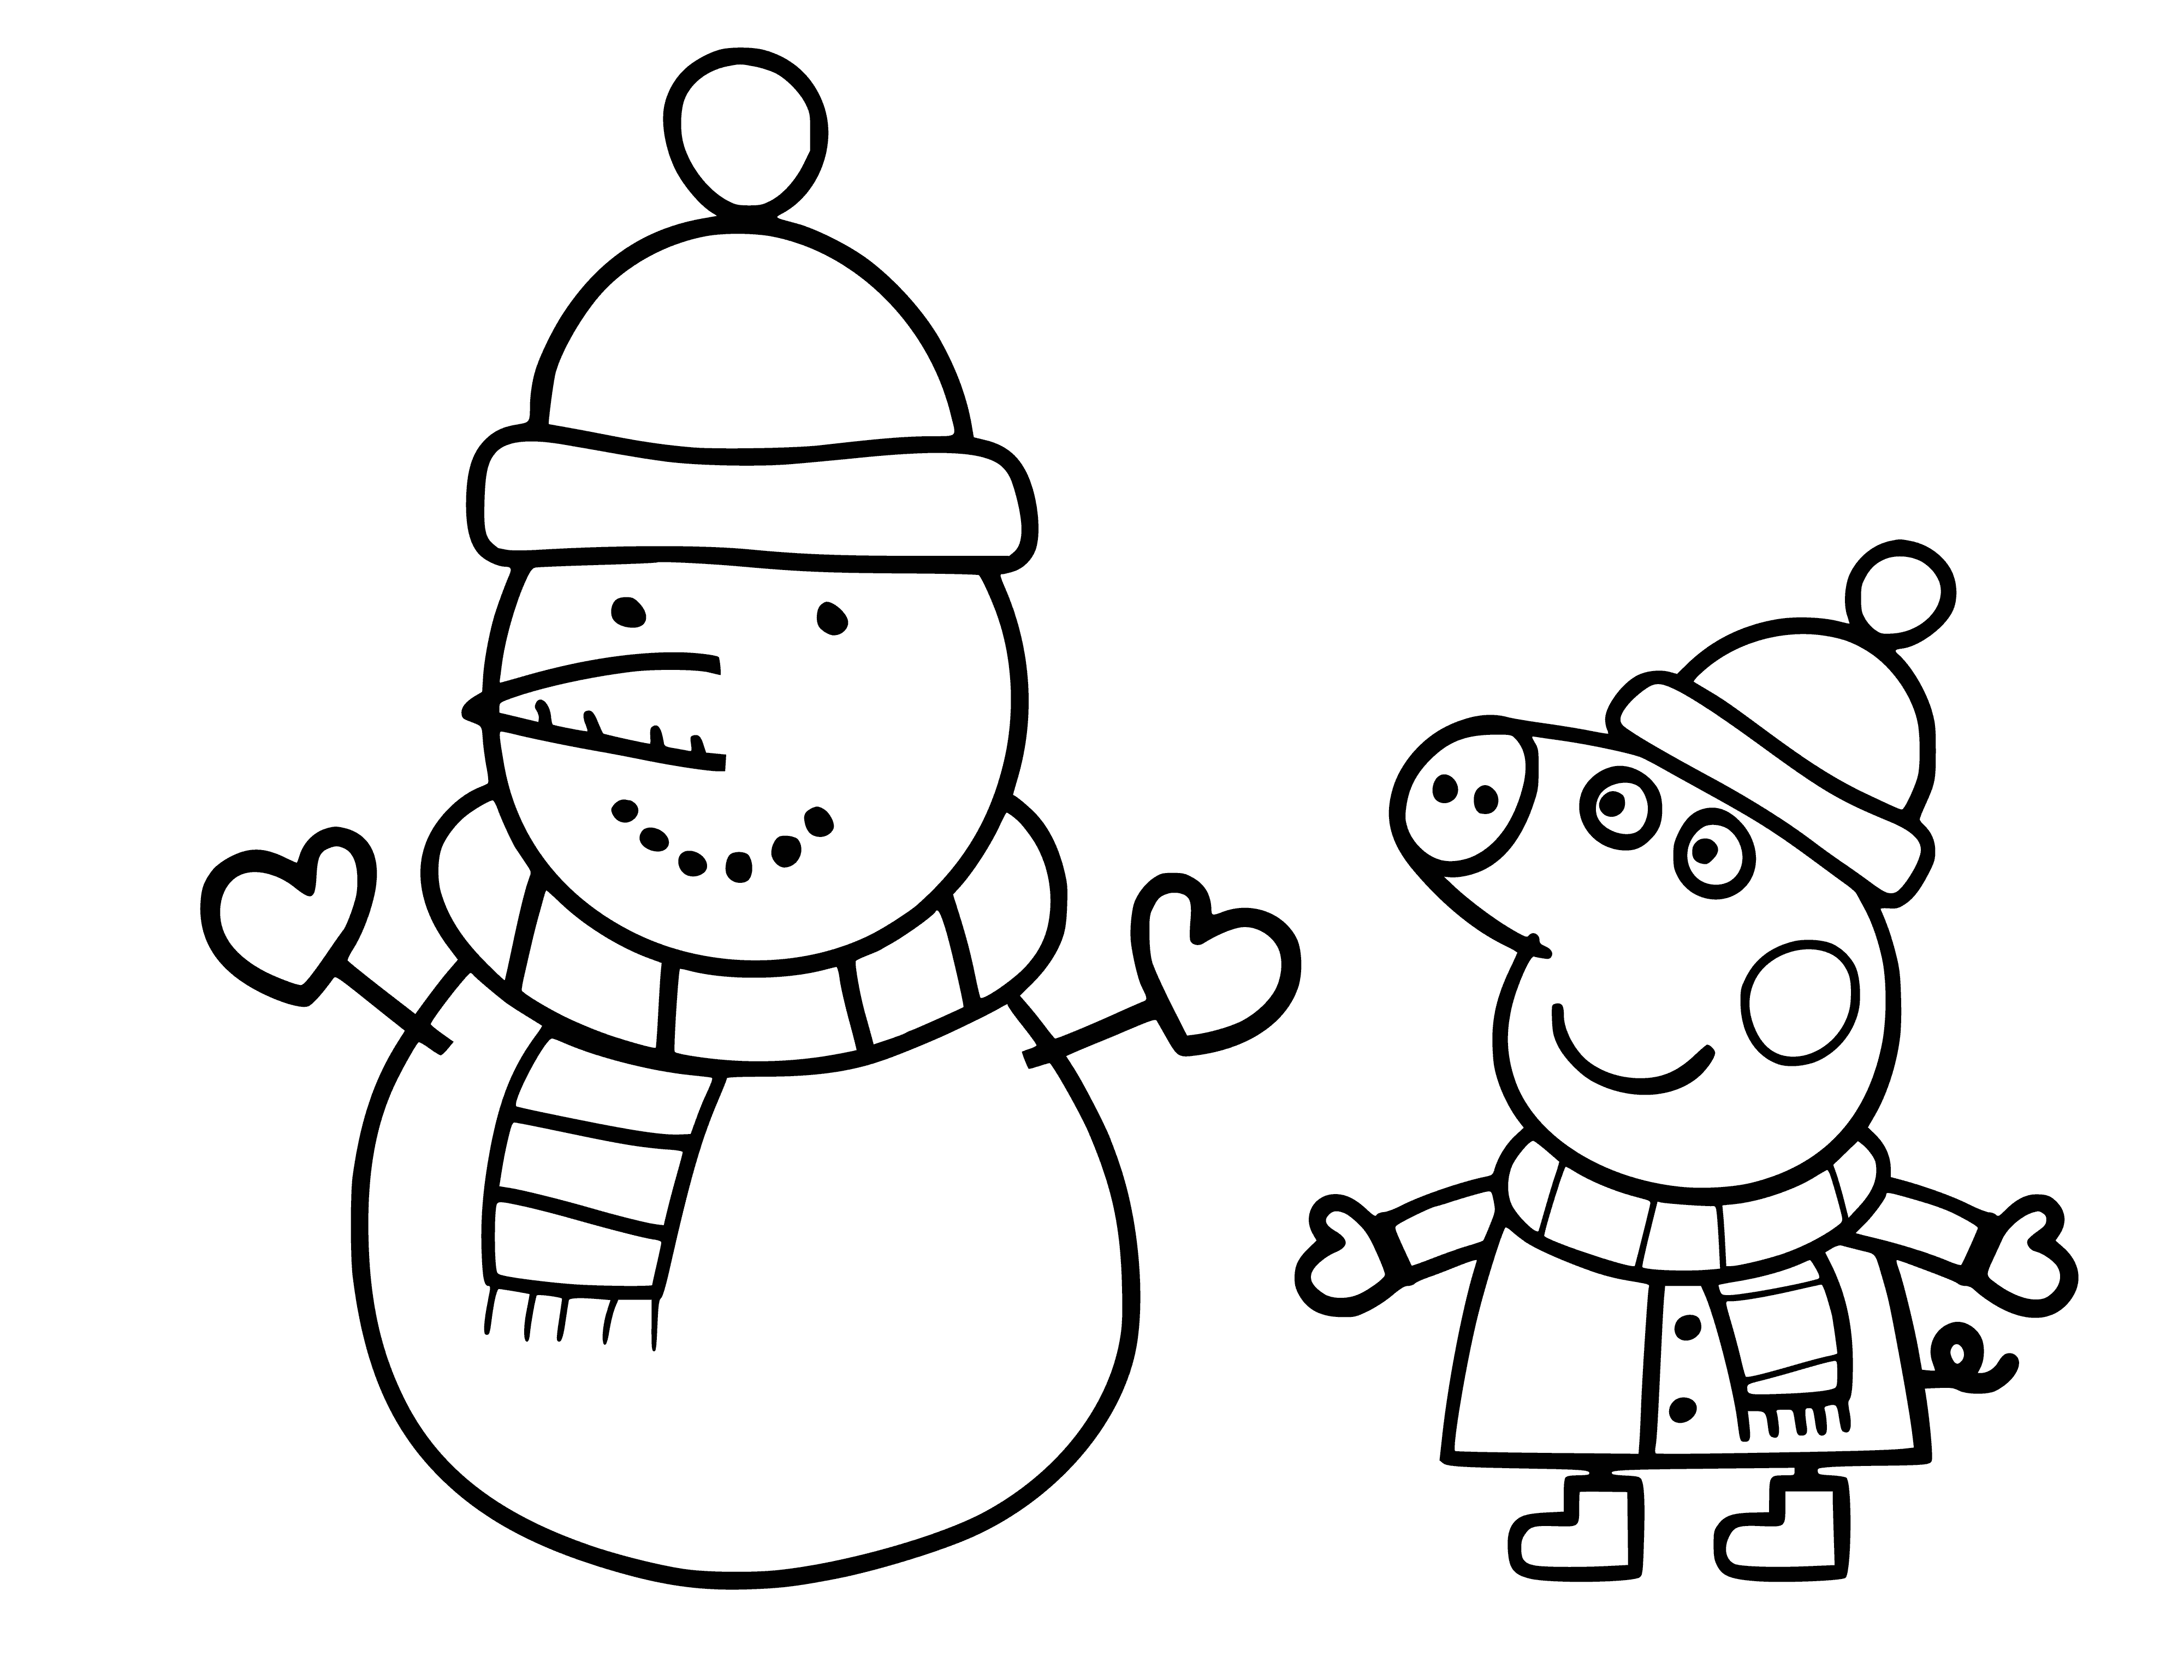 coloring page: Two piglets laughing: one standing on a snowman, the other on the ground.